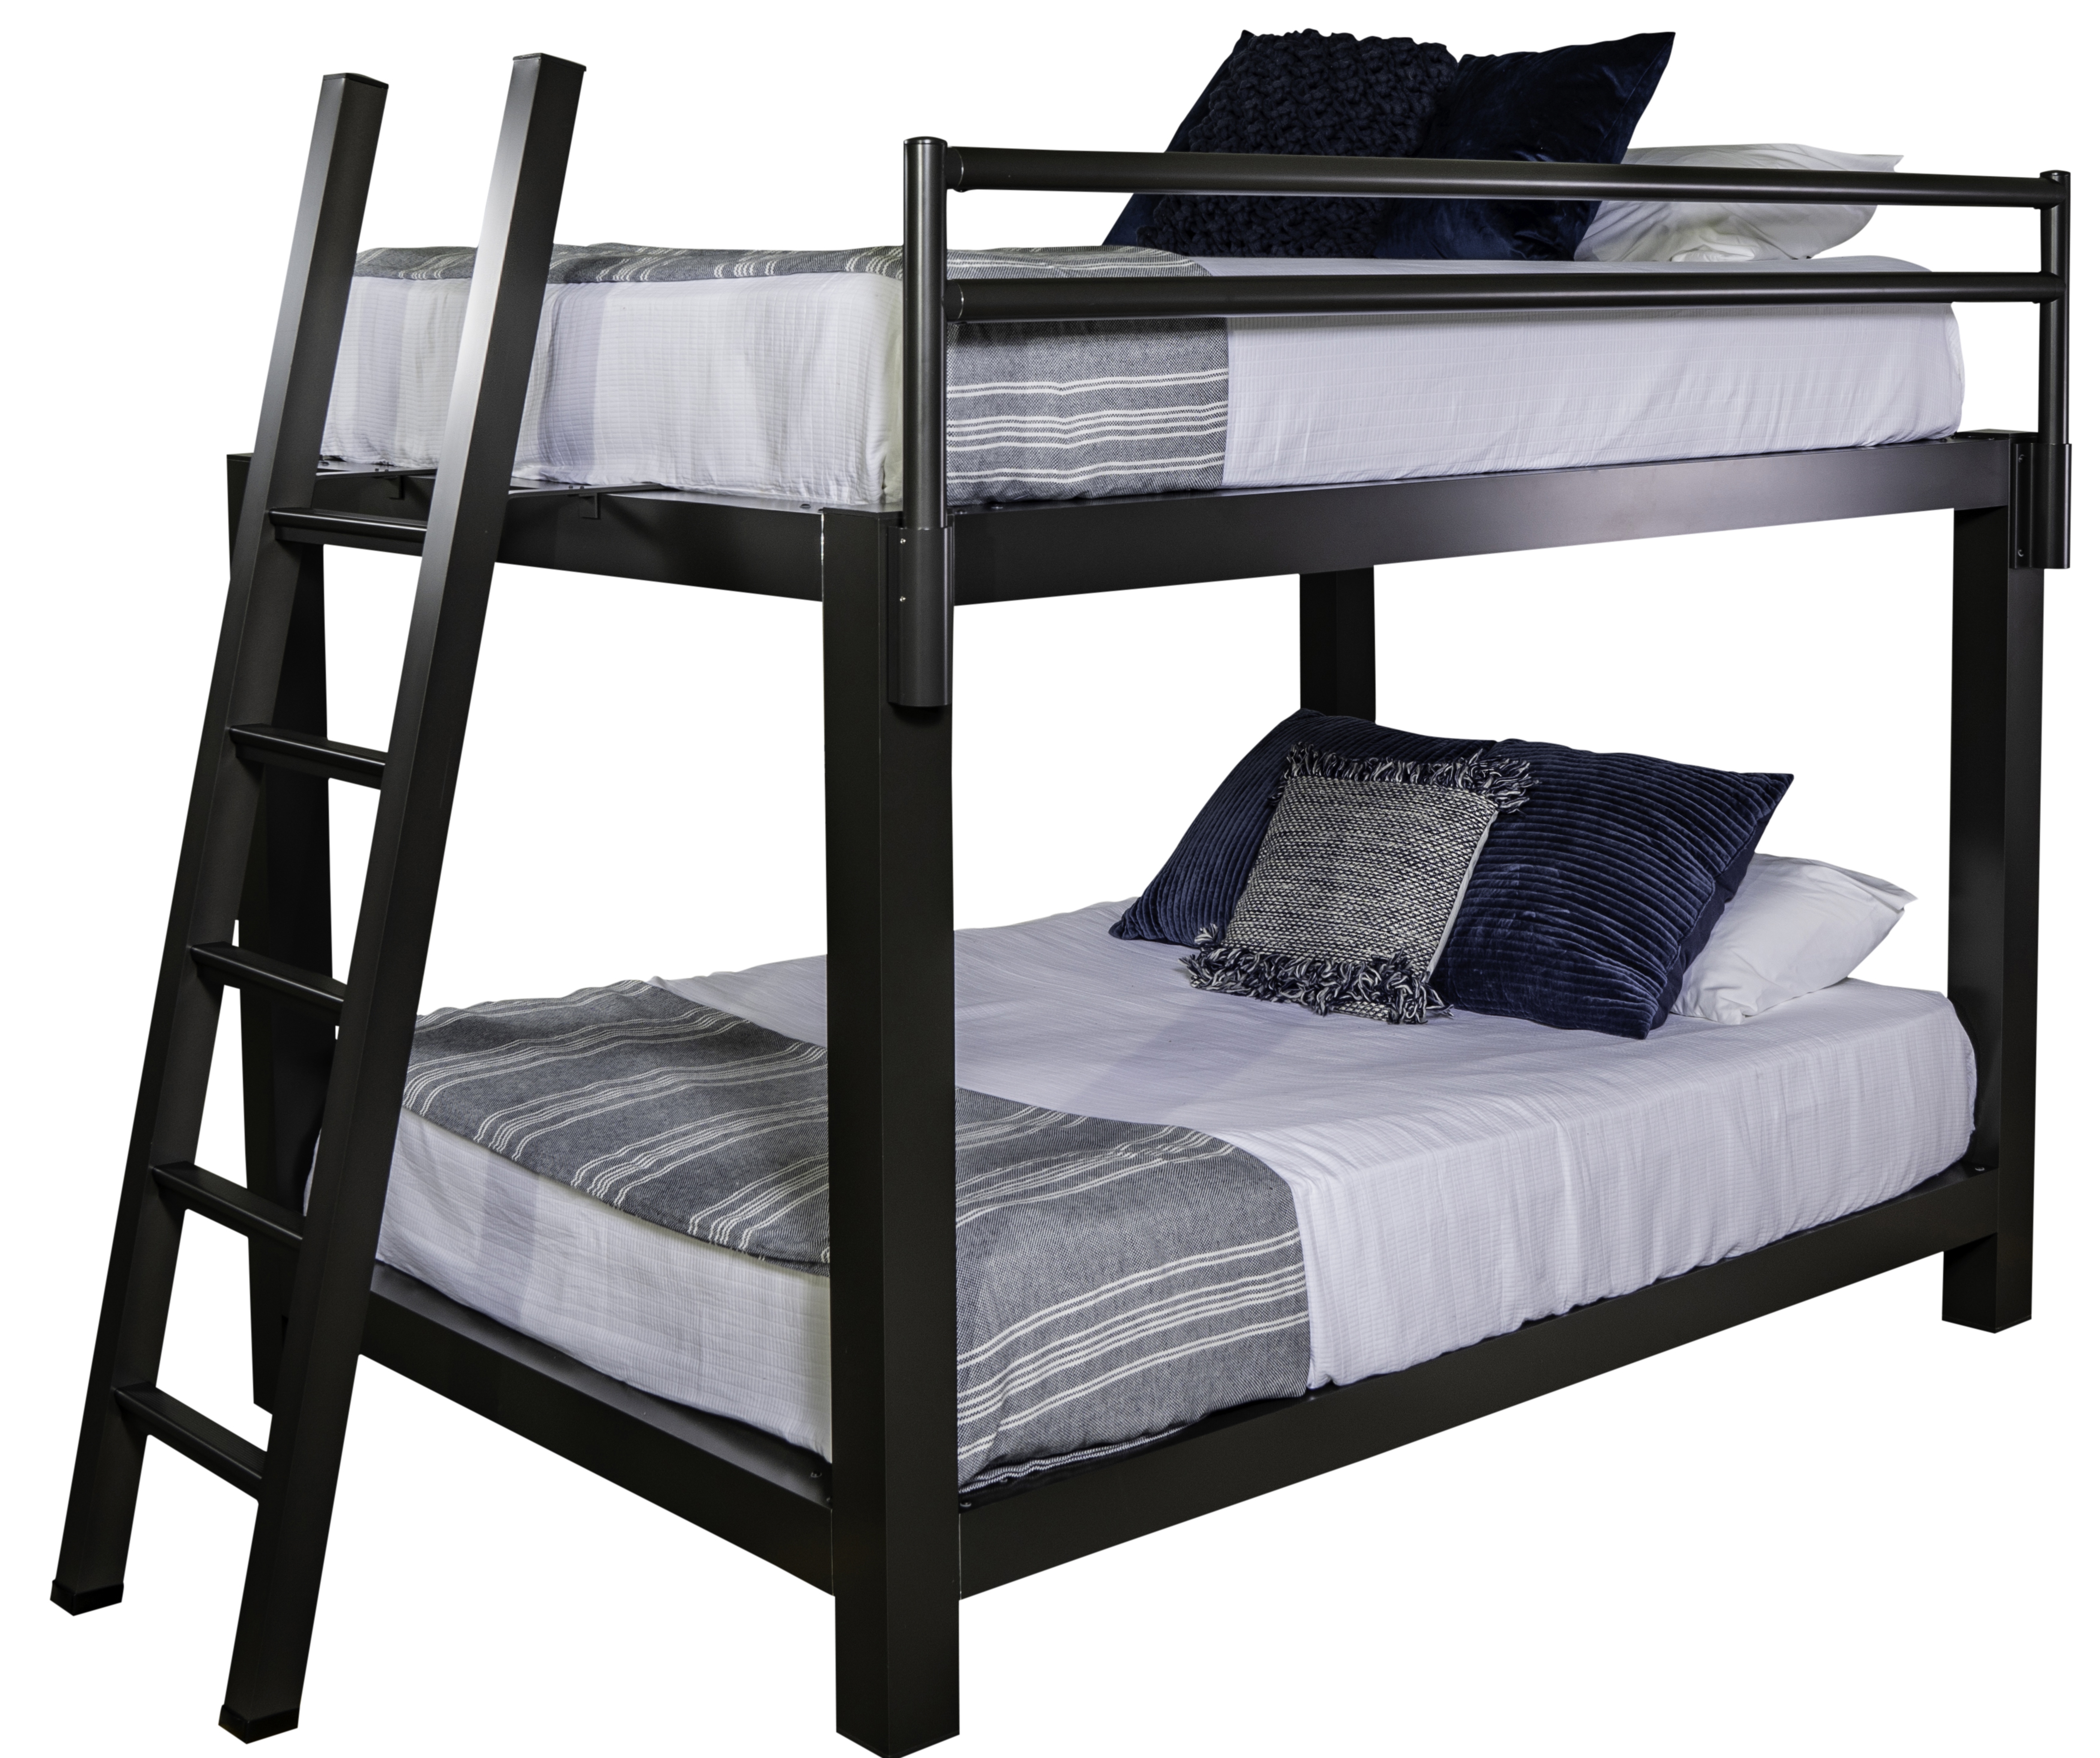 Bunk Beds, Do You Need A Boxspring For A Bunk Bed